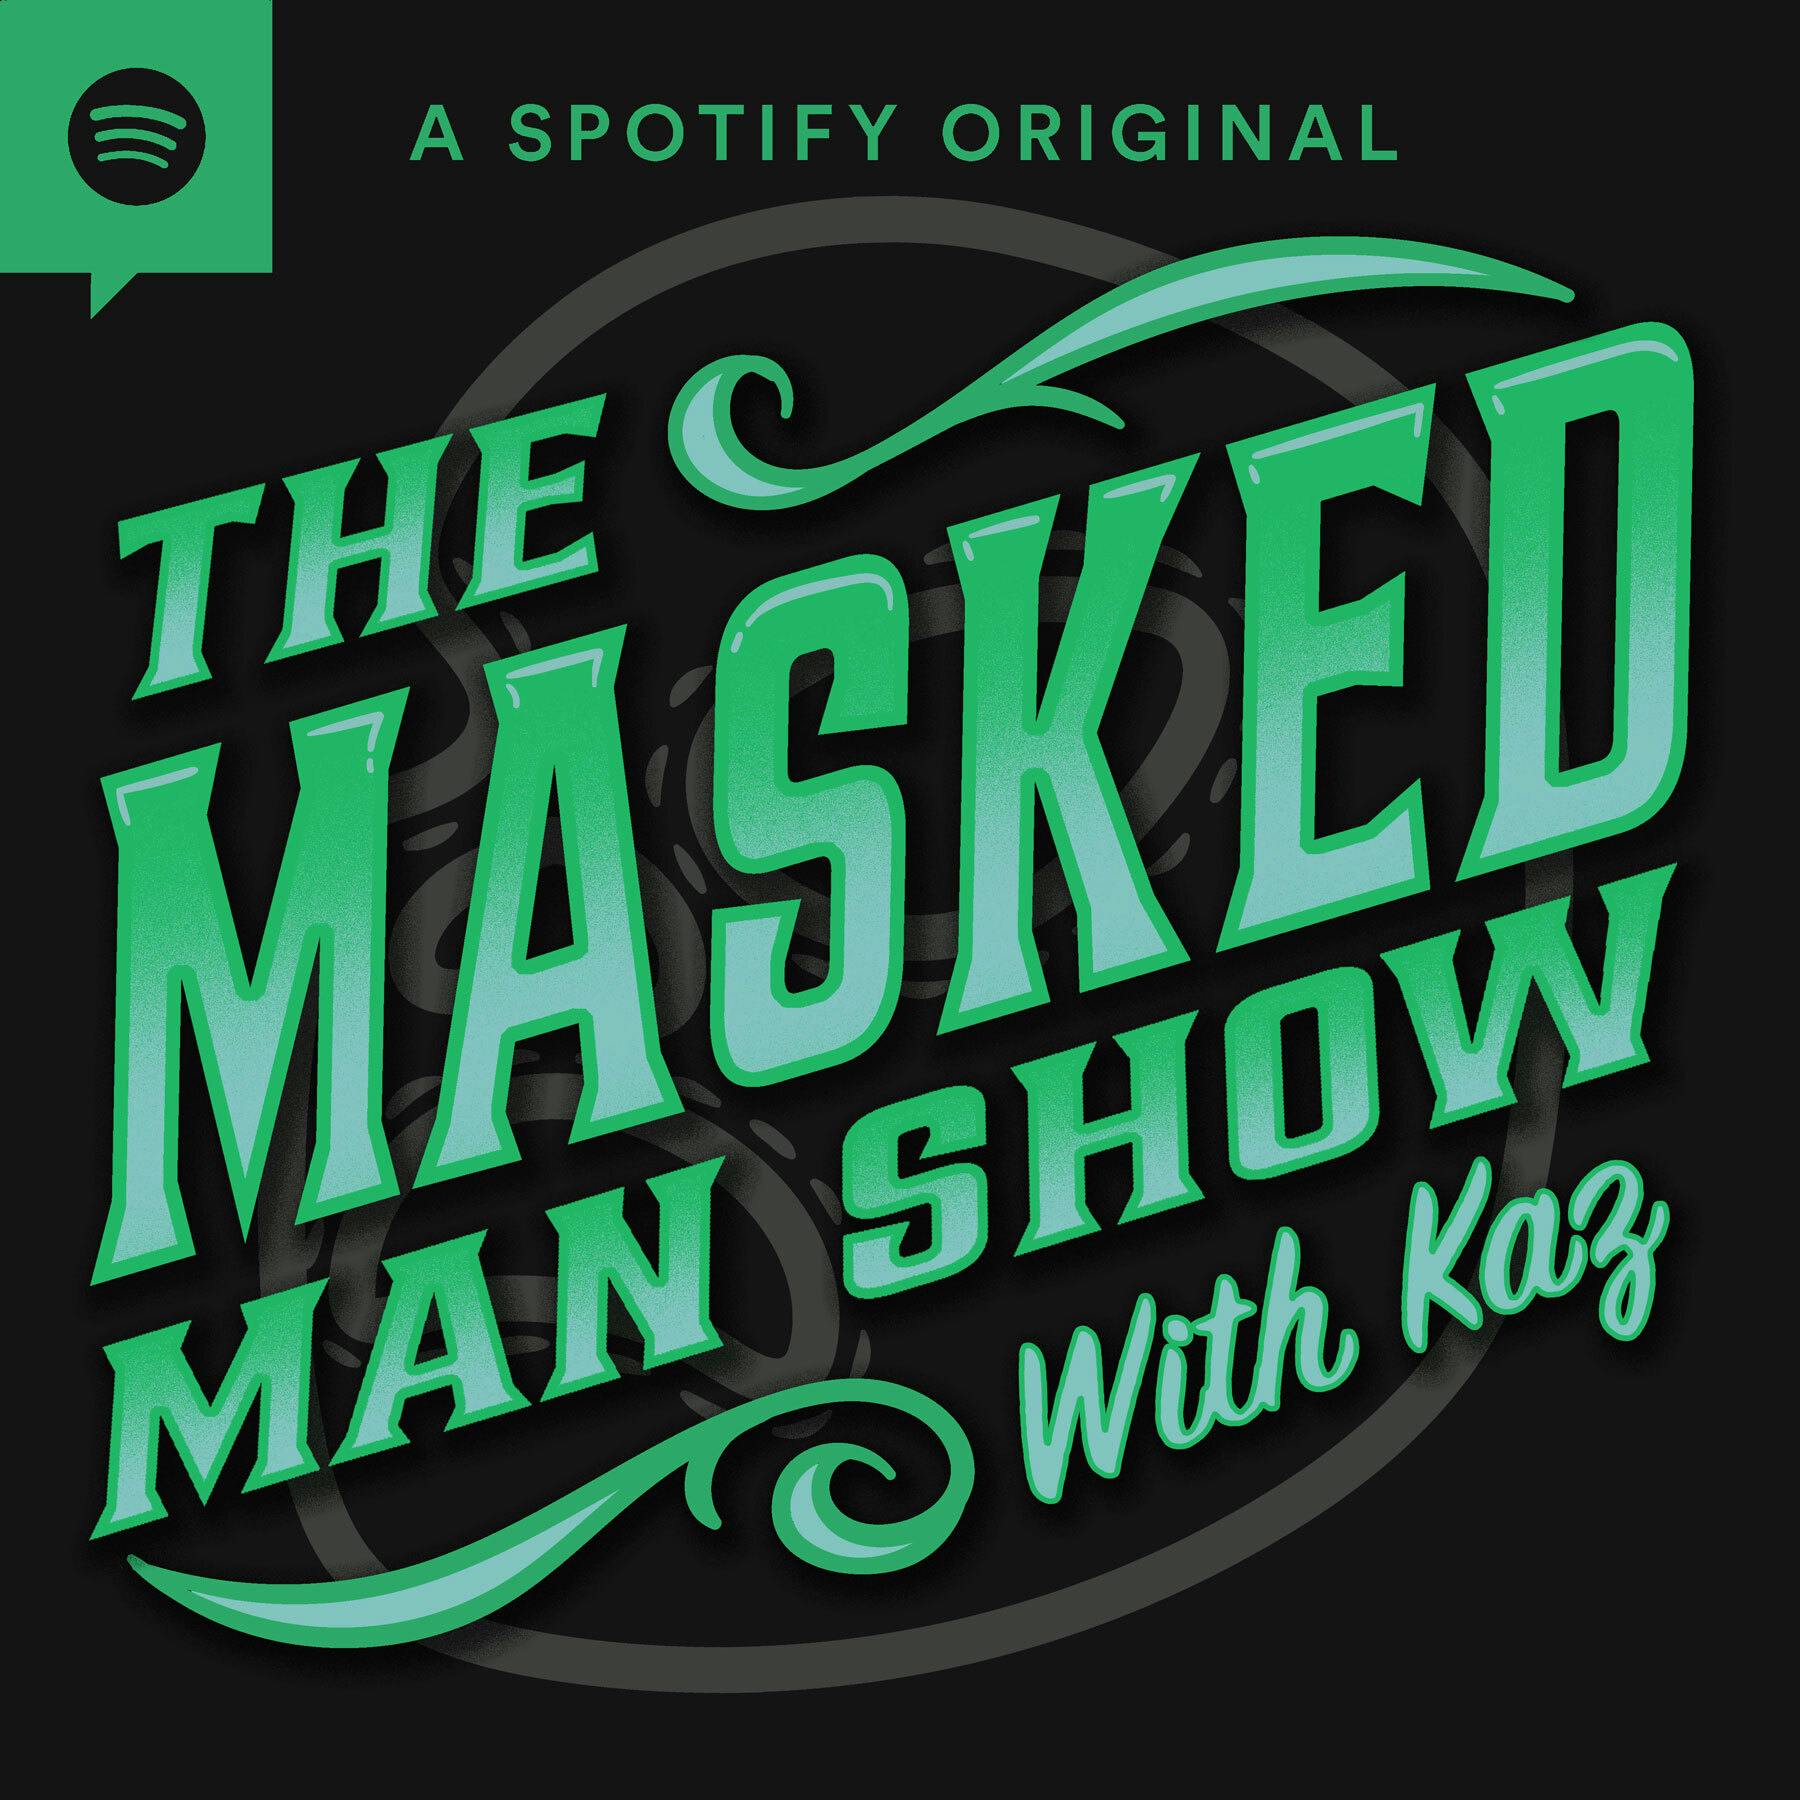 Tony Khan Presents Ric Flair as a Gift to Sting | The Masked Man Show